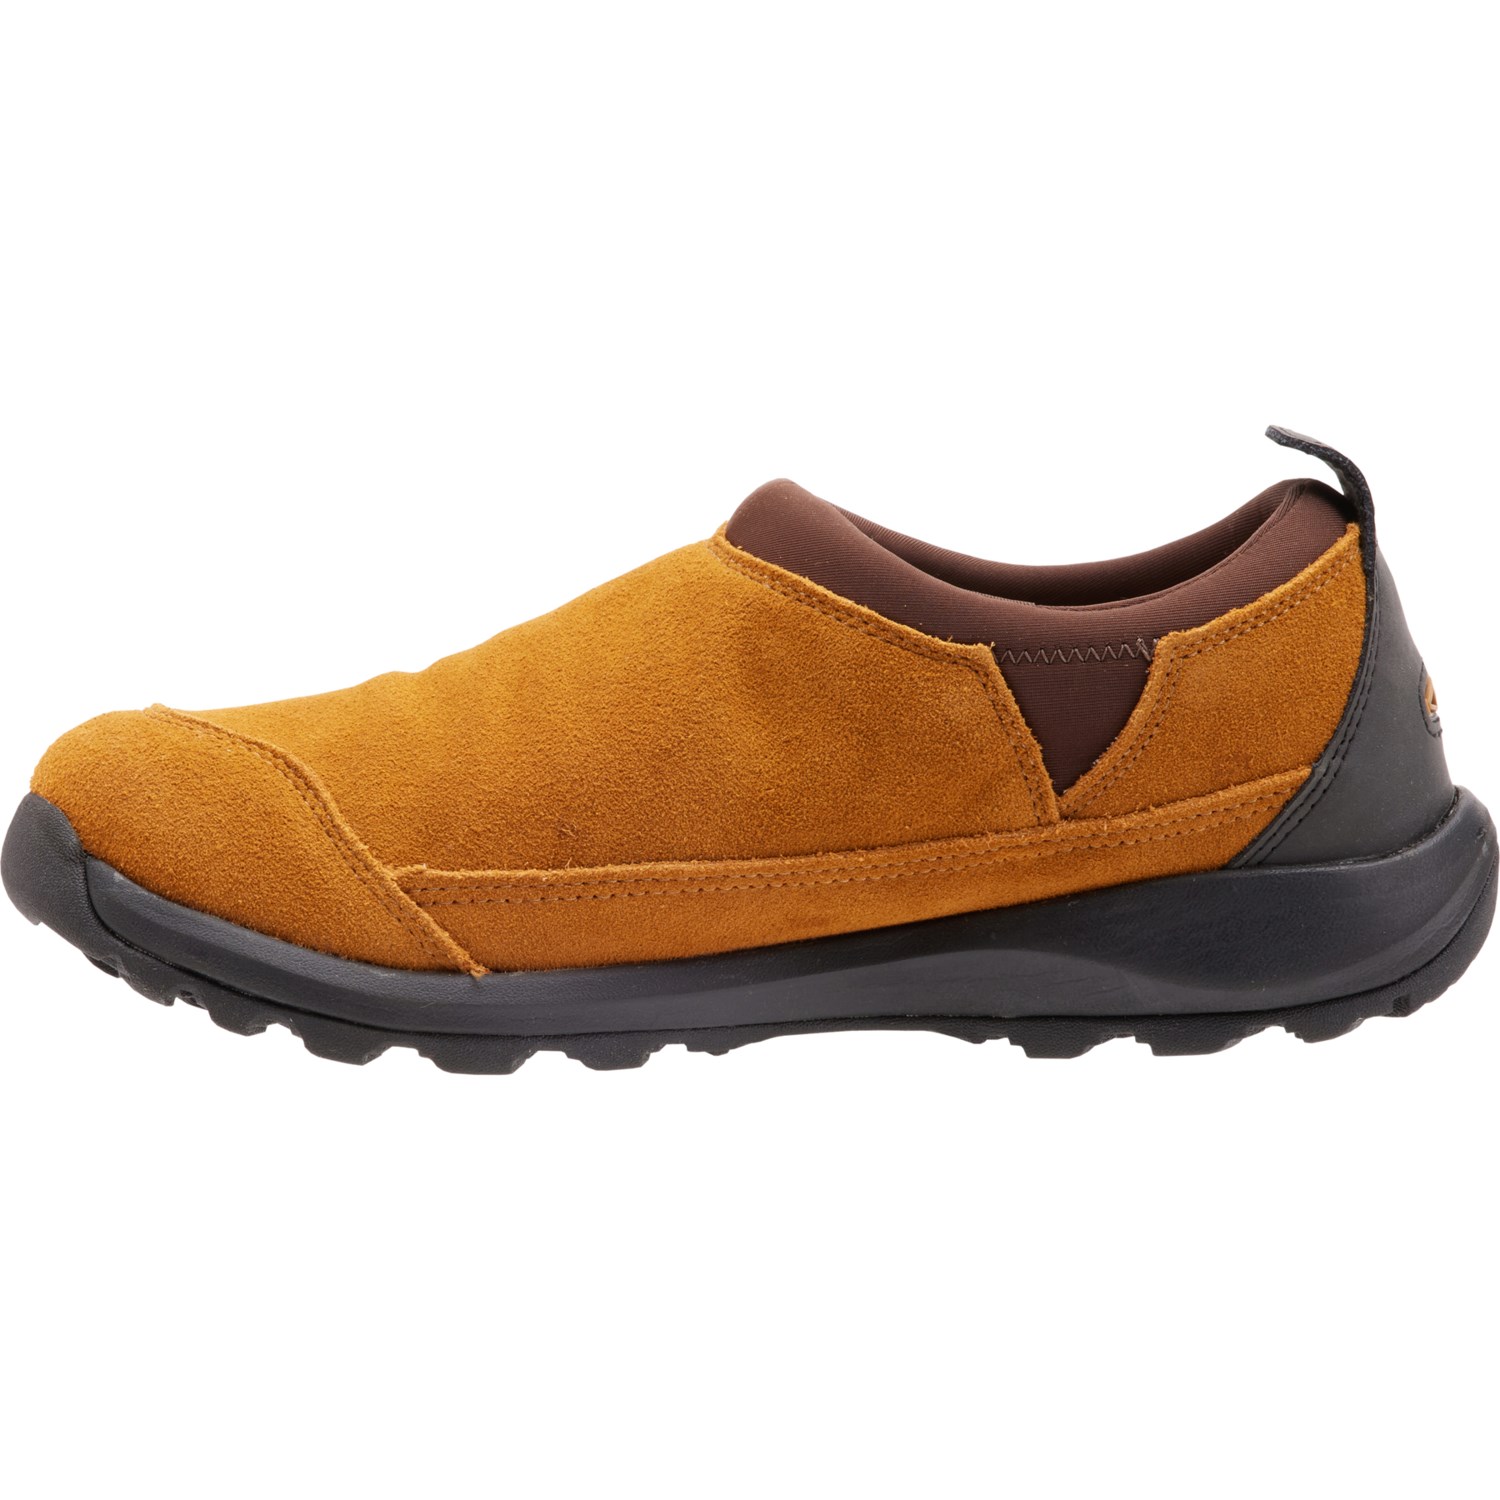 Keen Glieser Moc Shoes (For Men) - Save 42%